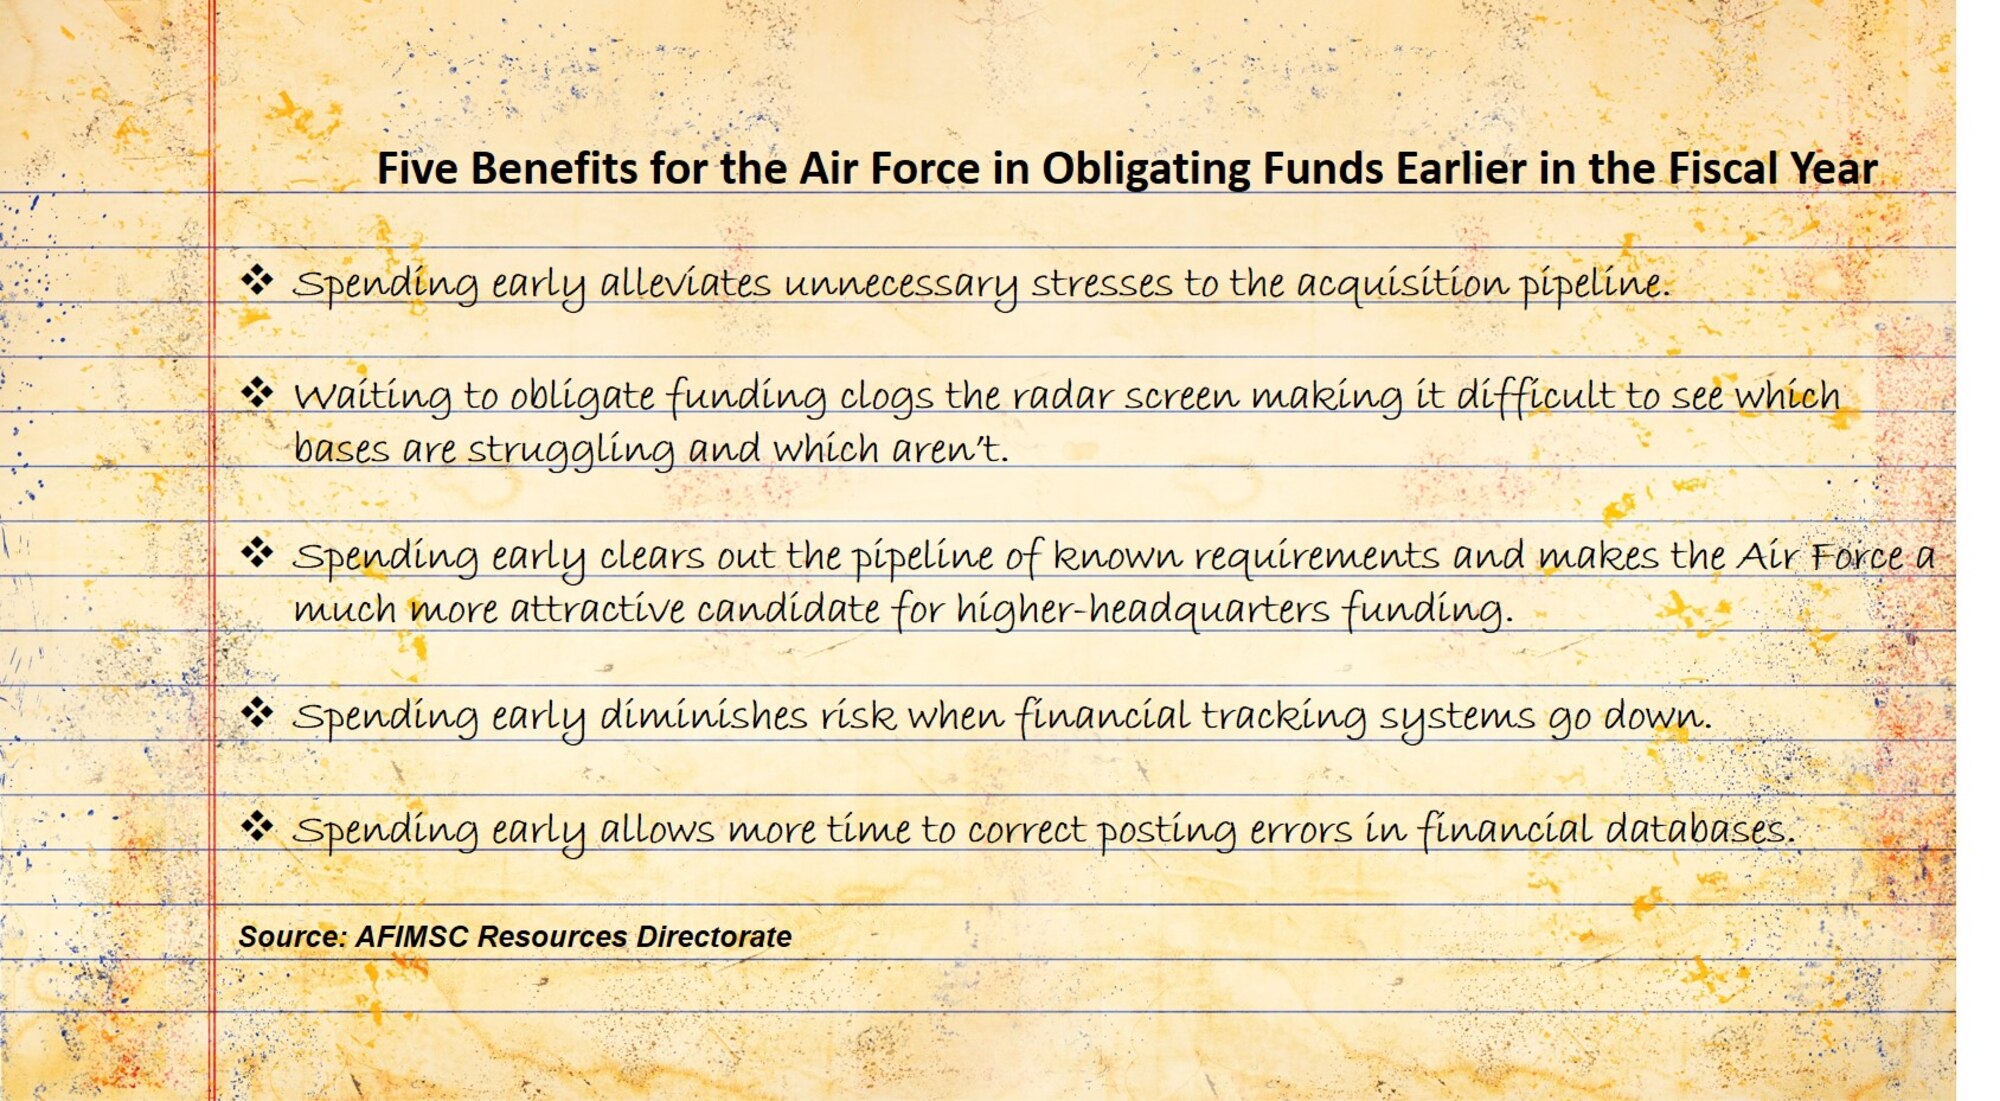 The AFIMSC Resources Team offers five benefits for the Air Force in obligating funds earlier in the fiscal year.